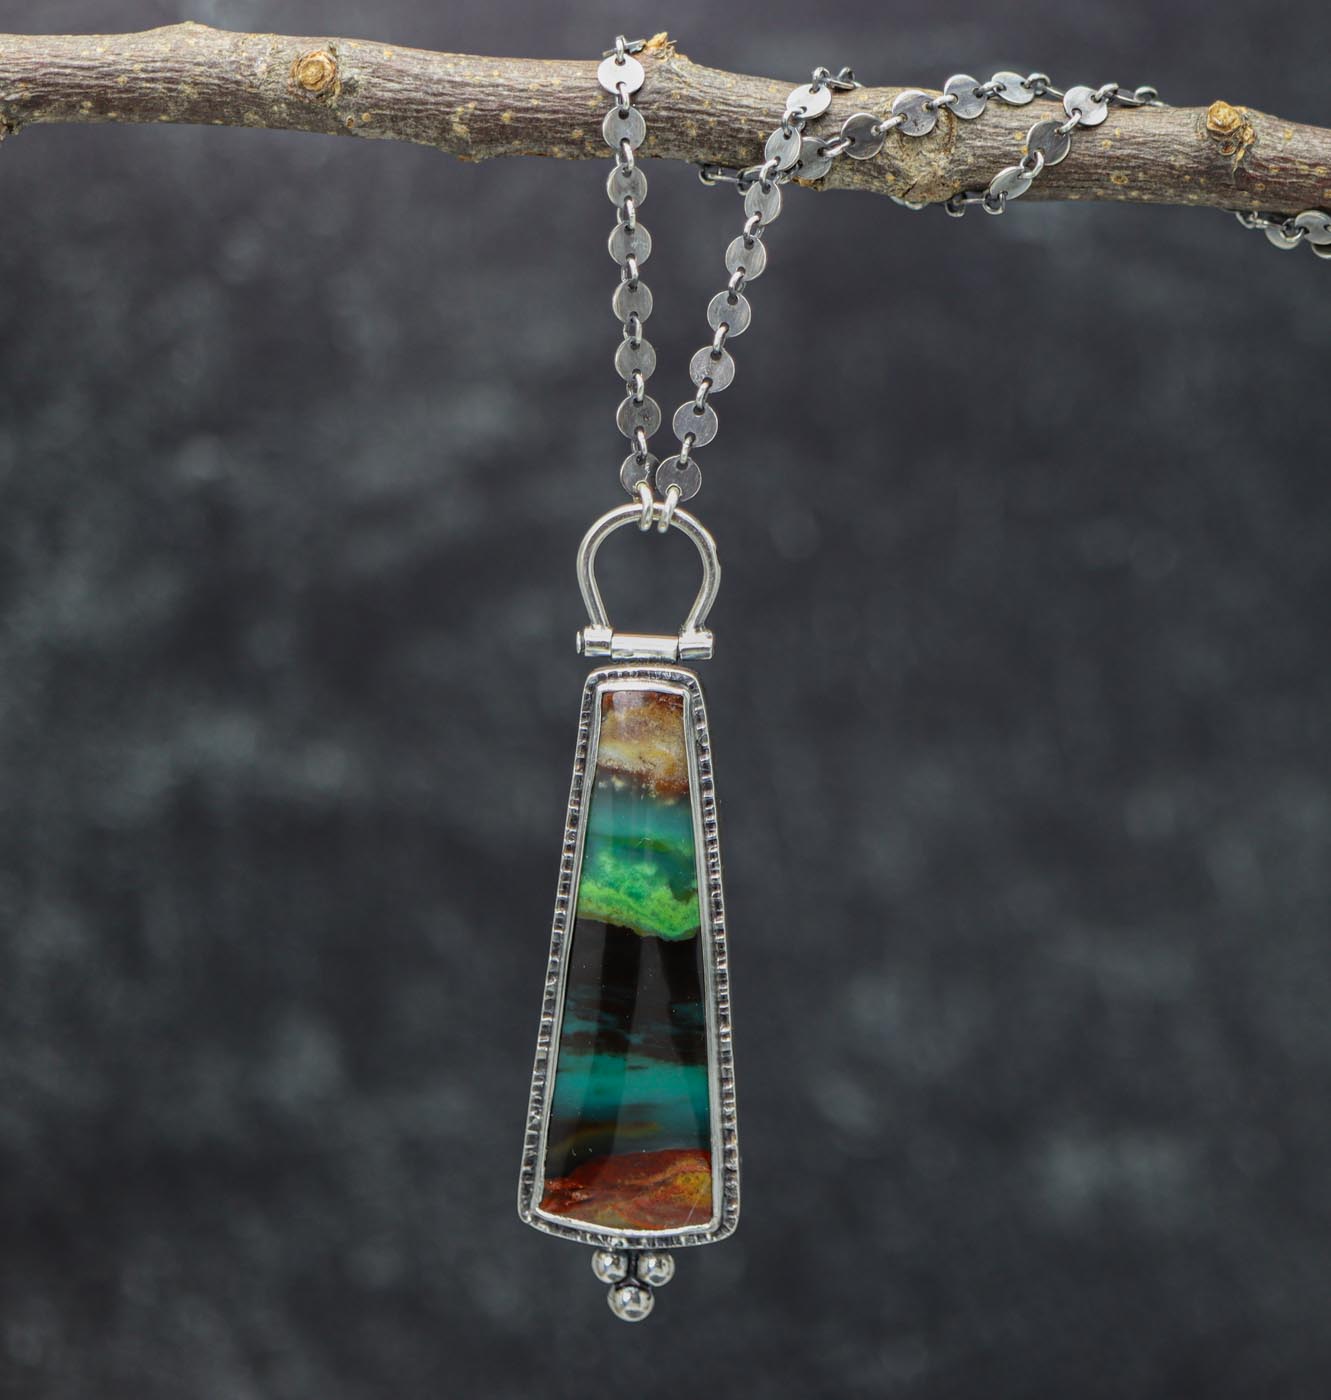 Petrified Opal Wood Pendant Sterling Silver One Of a Kind Gemstone Necklace